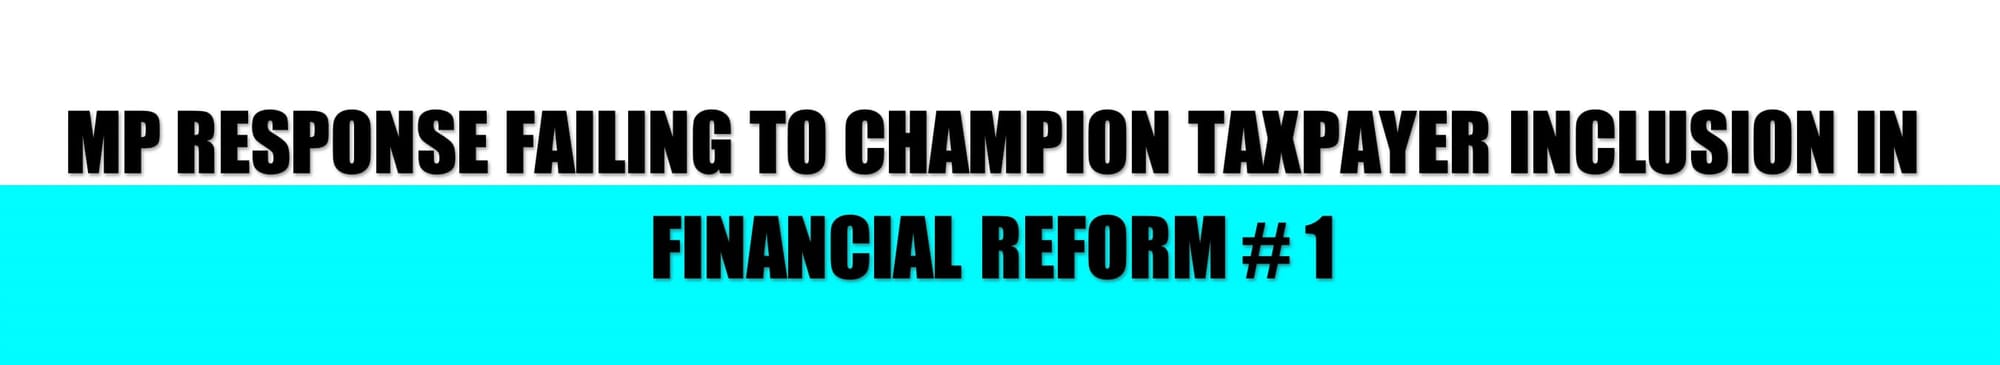 HEADER: MP RESPONSE FAILING TO CHAMPION TAXPAYER INCLUSION IN FINANCIAL REFORM 